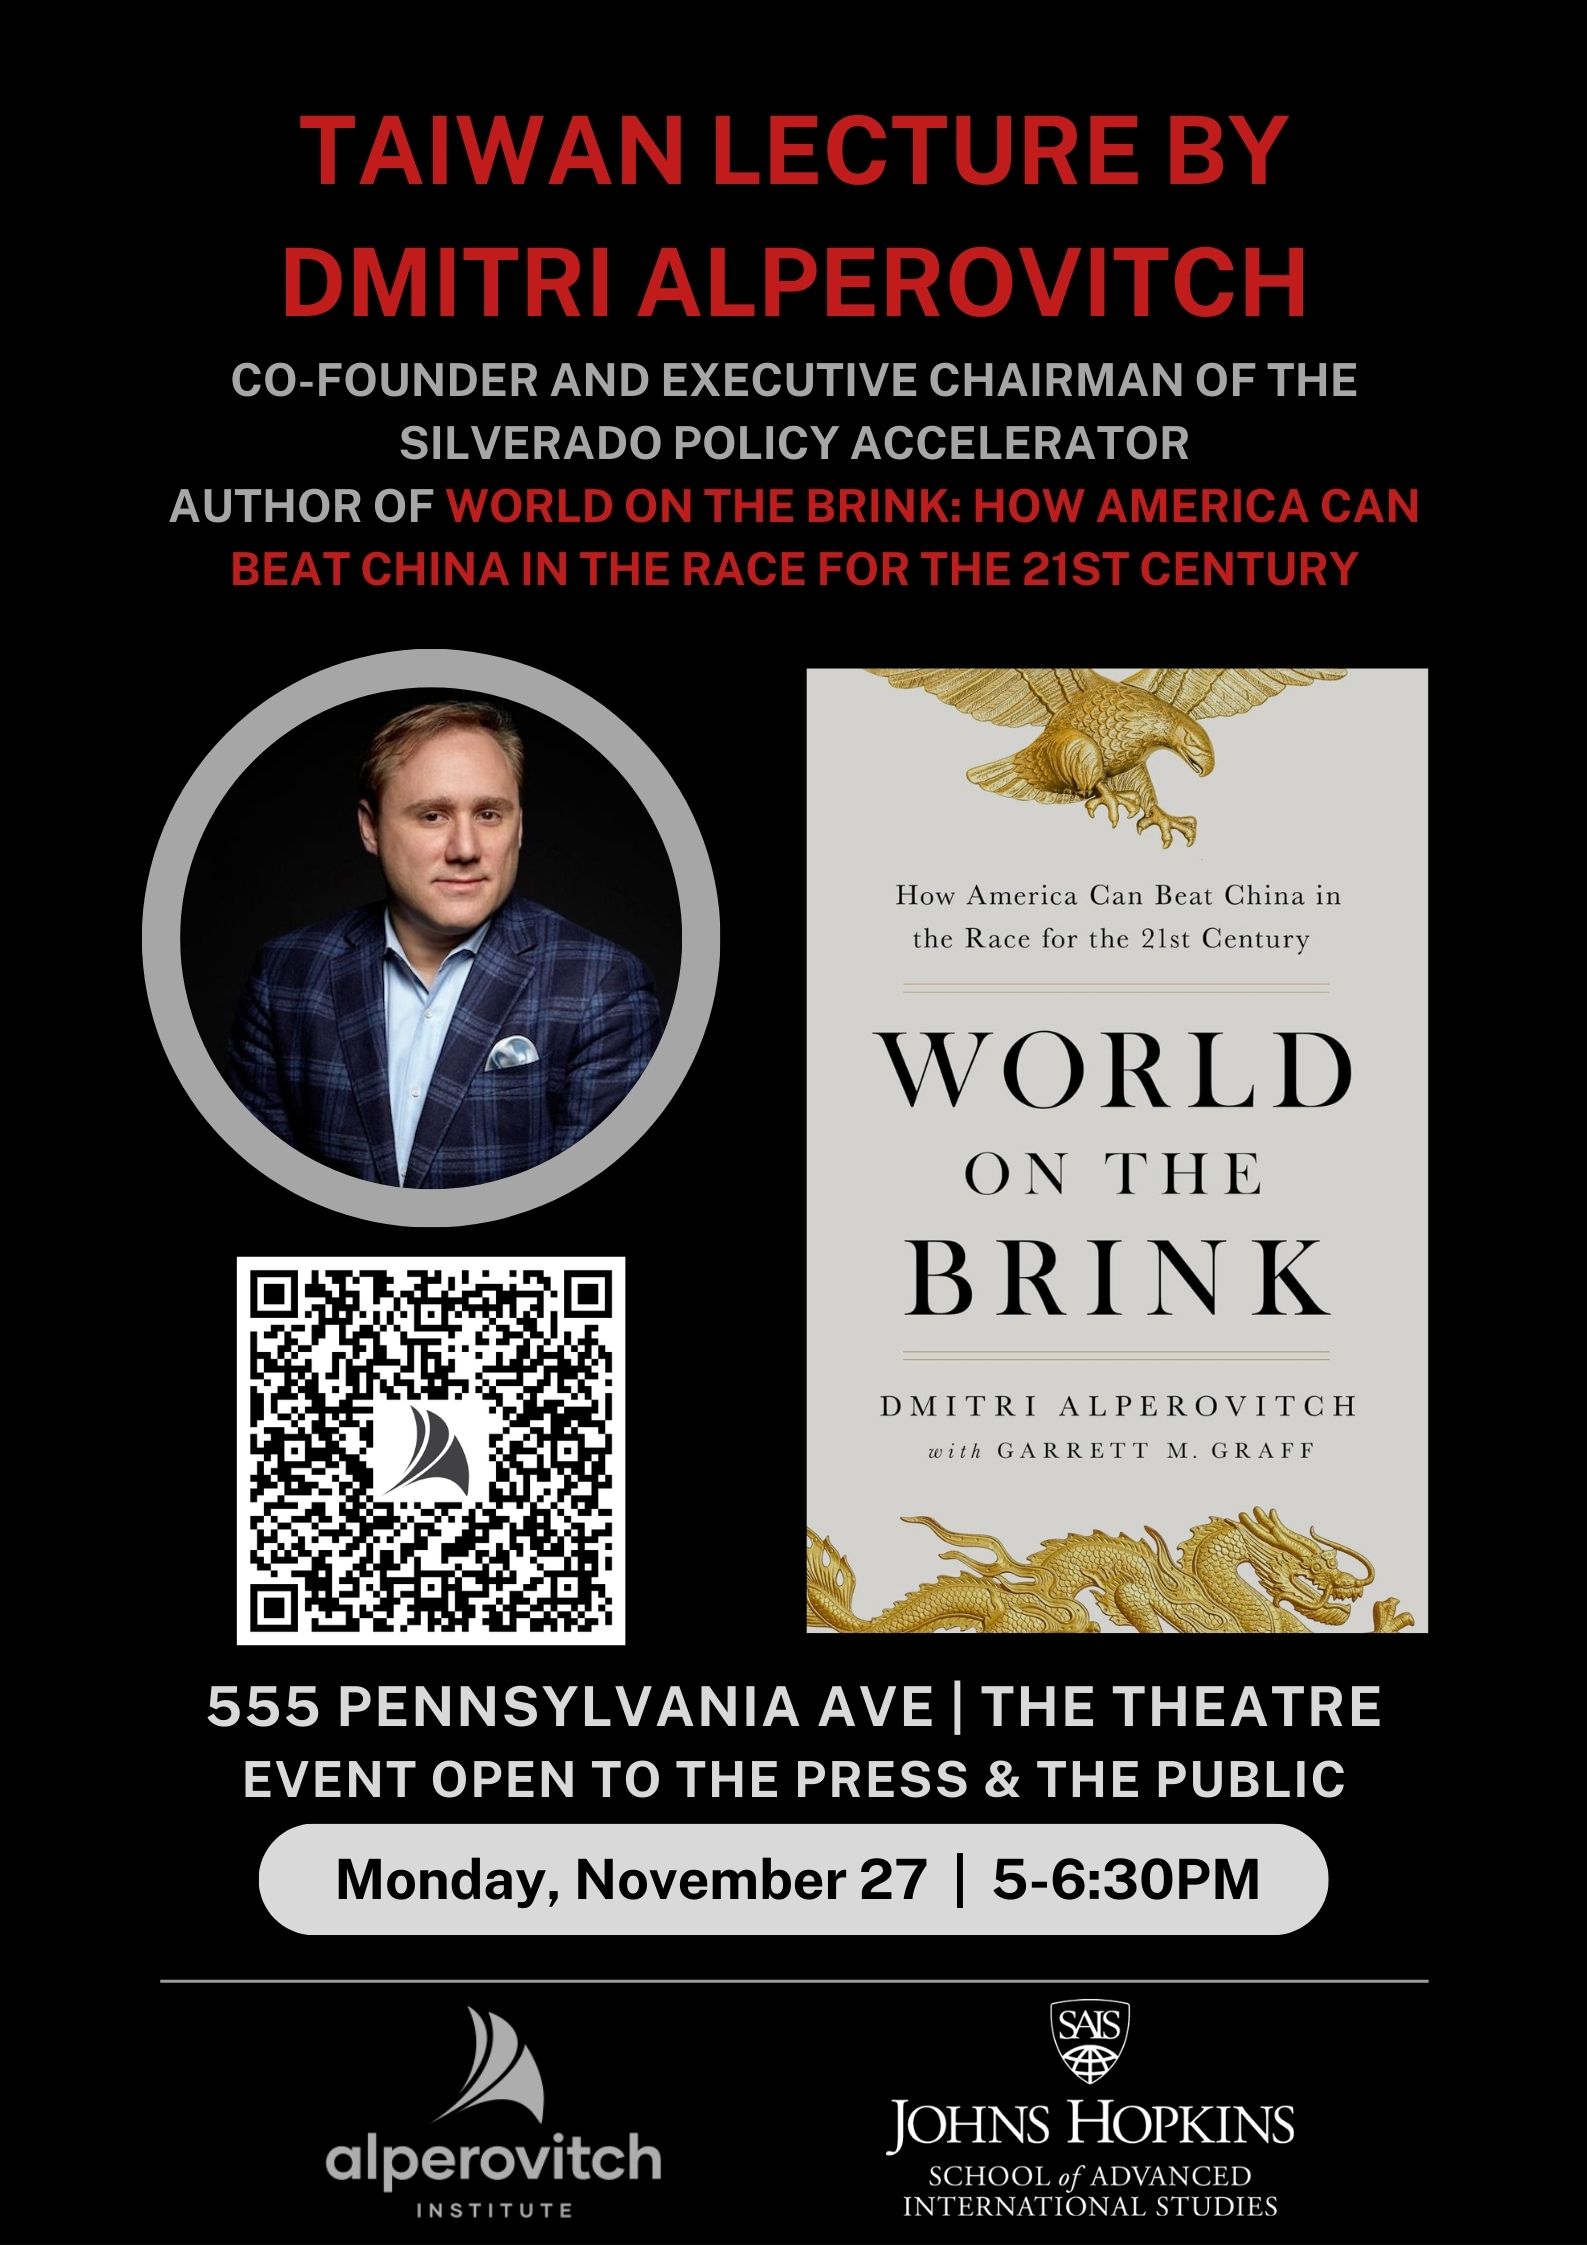 DMITRI ALPEROVITCH TO DELIVER TAIWAN LECTURE AT JOHNS HOPKINS SAIS ...